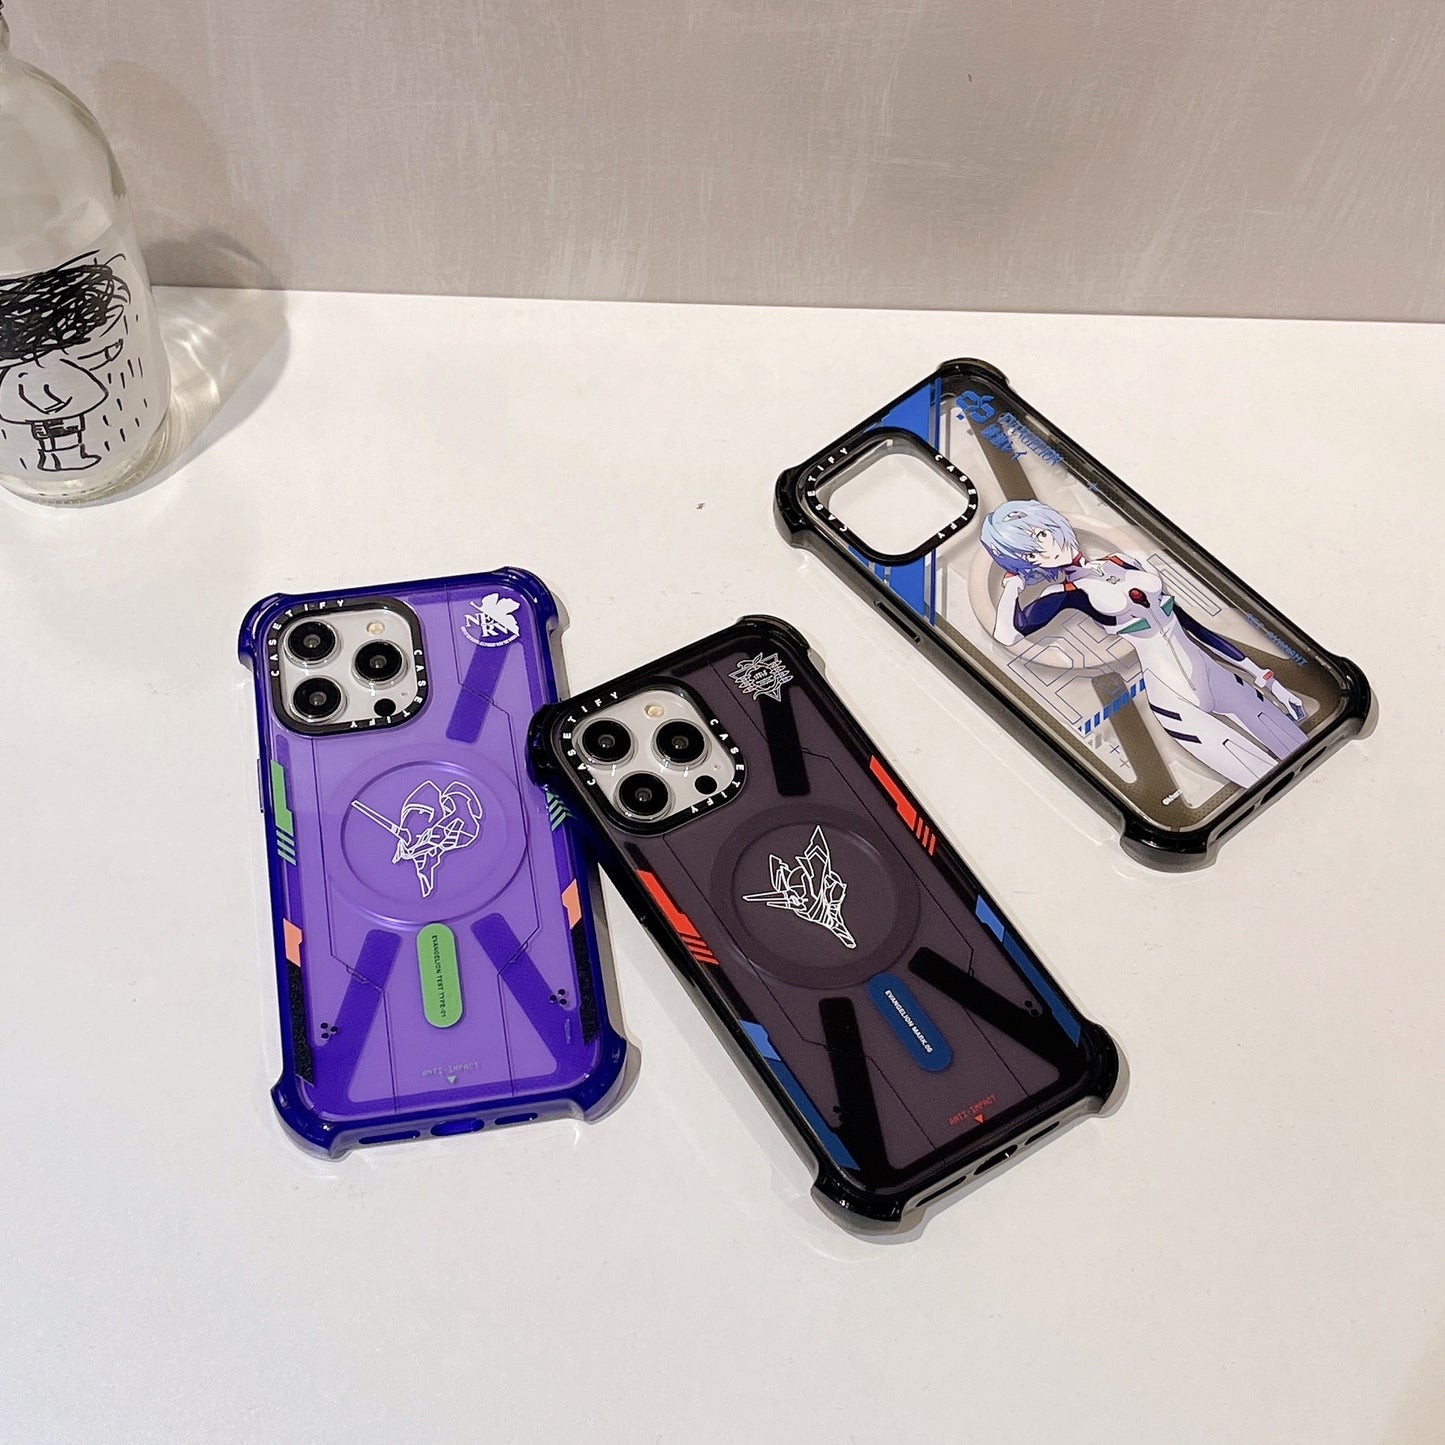 The new iPhone Case:Evangelion Mech